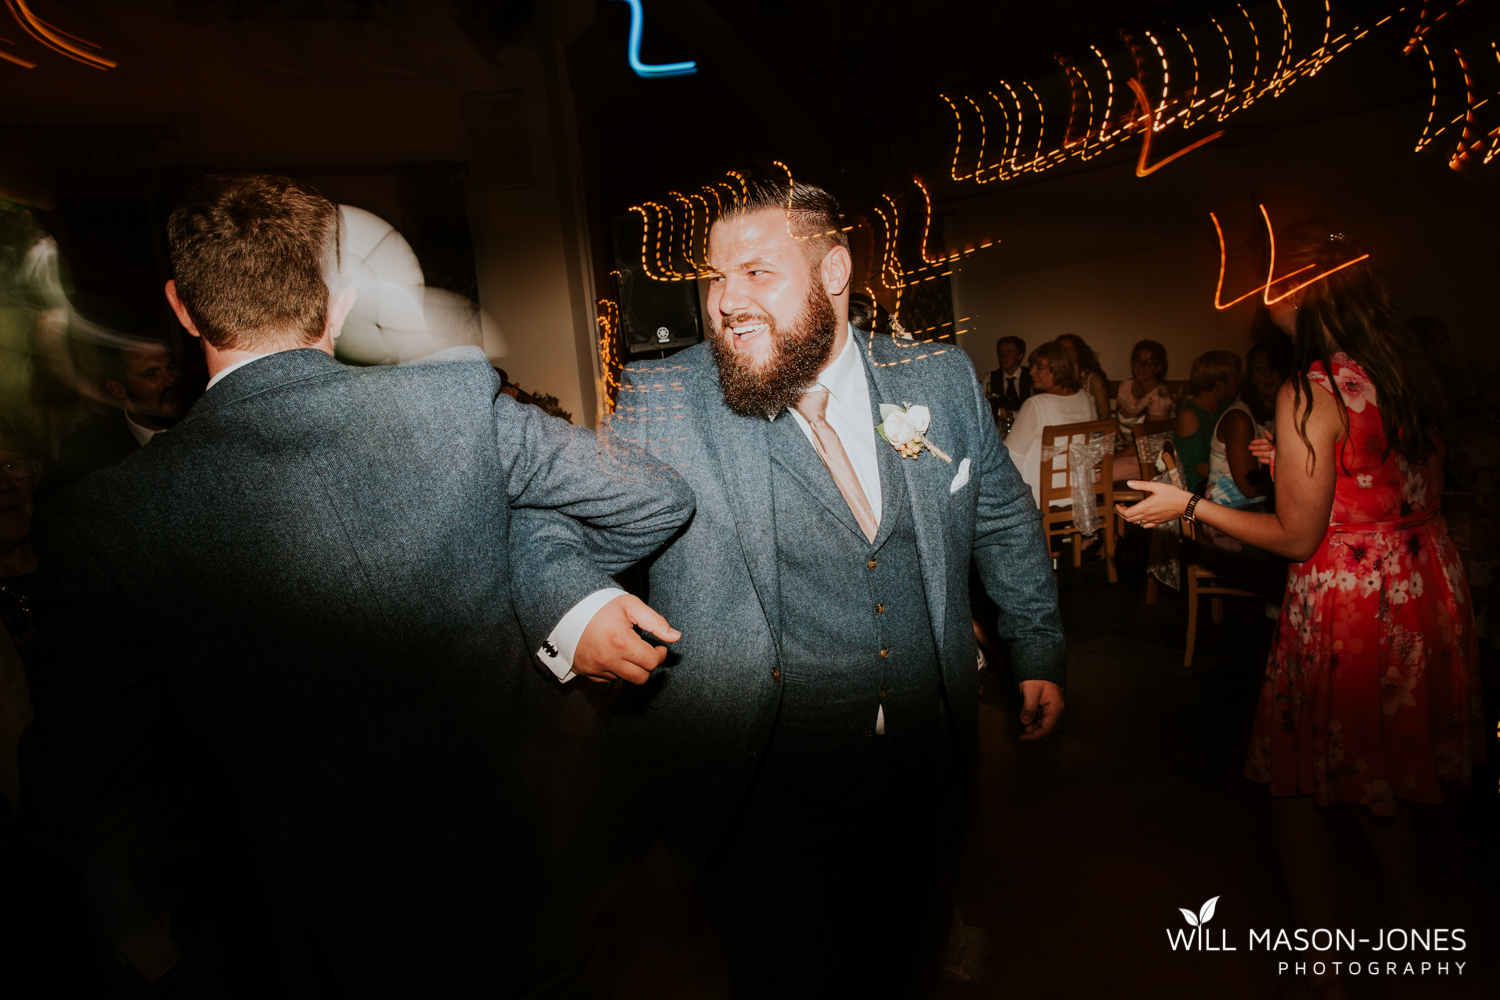  fun colourful and relaxed wedding dancefloor evening photography at king arthur hotel swansea 